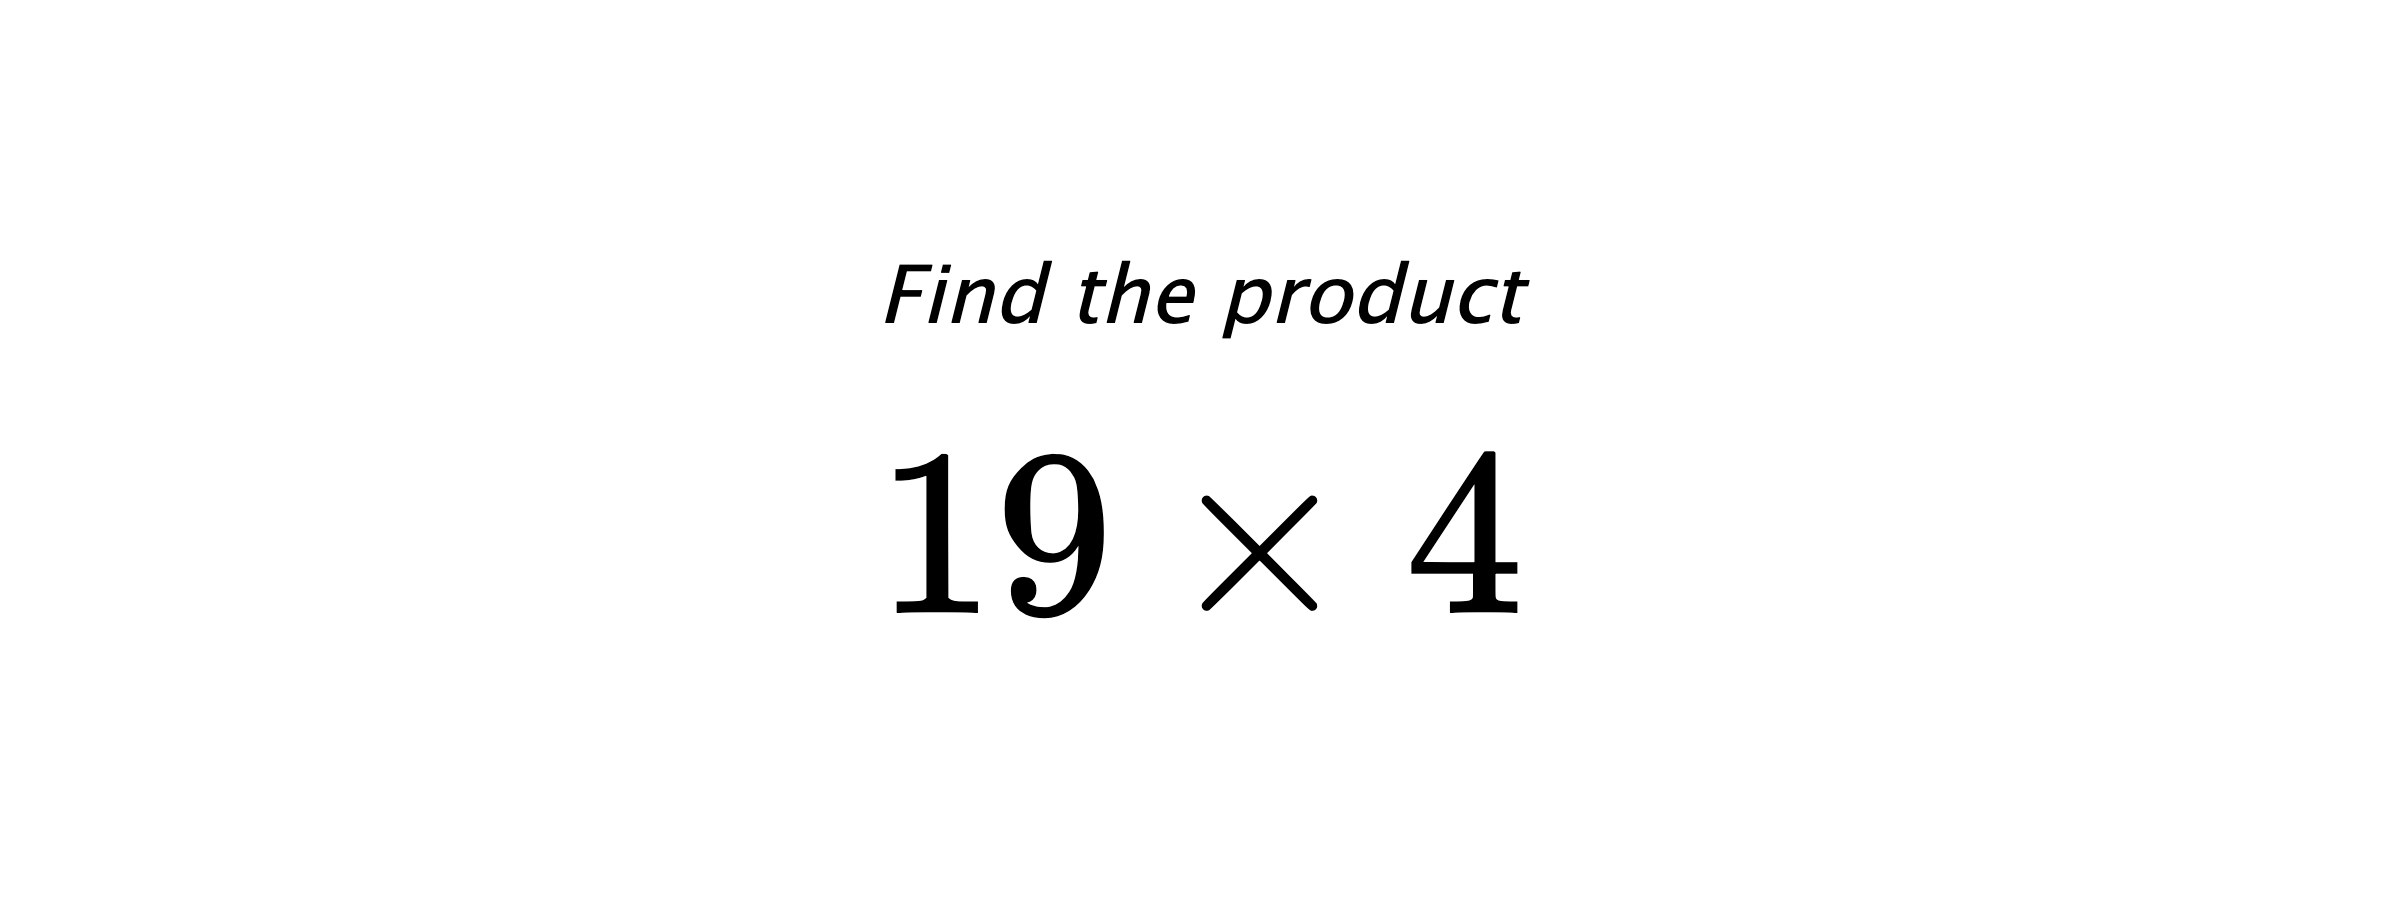 Find the product $ 19 \times 4 $